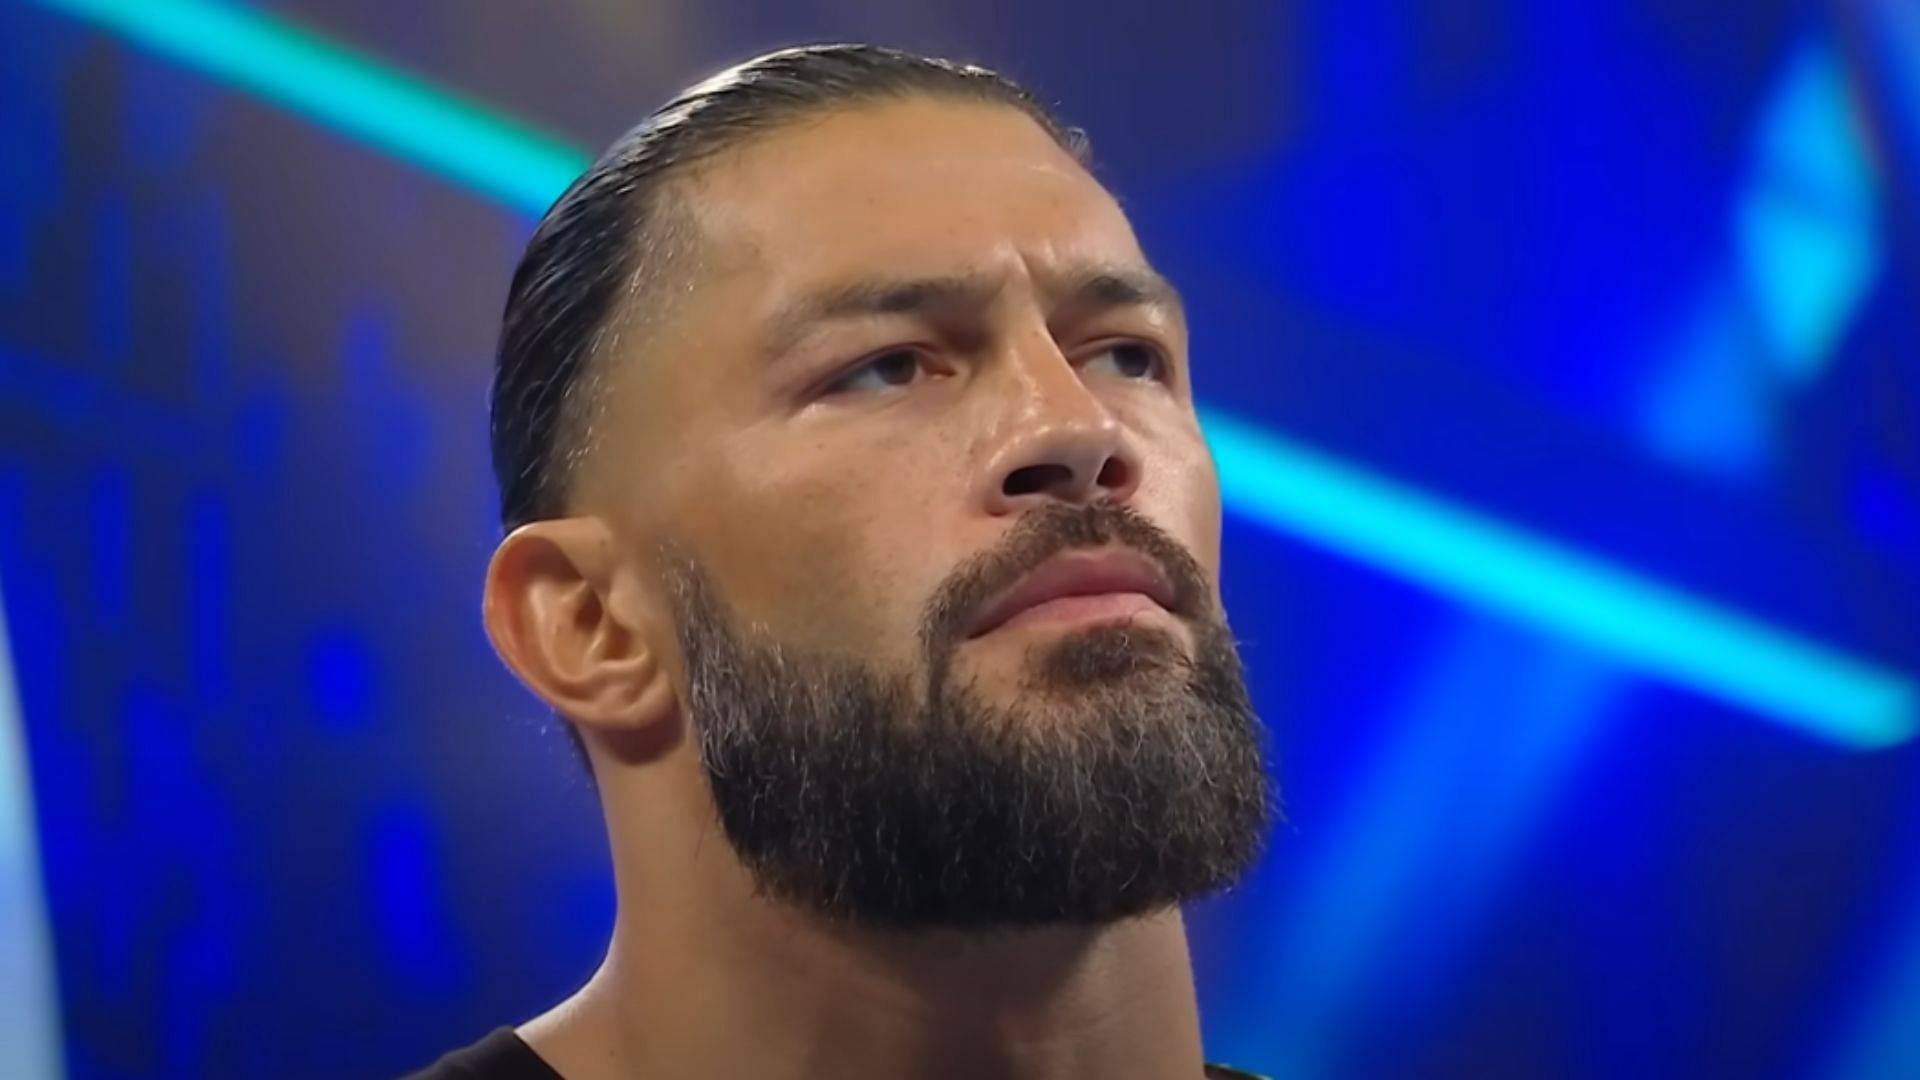 Roman Reigns has performed as a heel for the last two years.